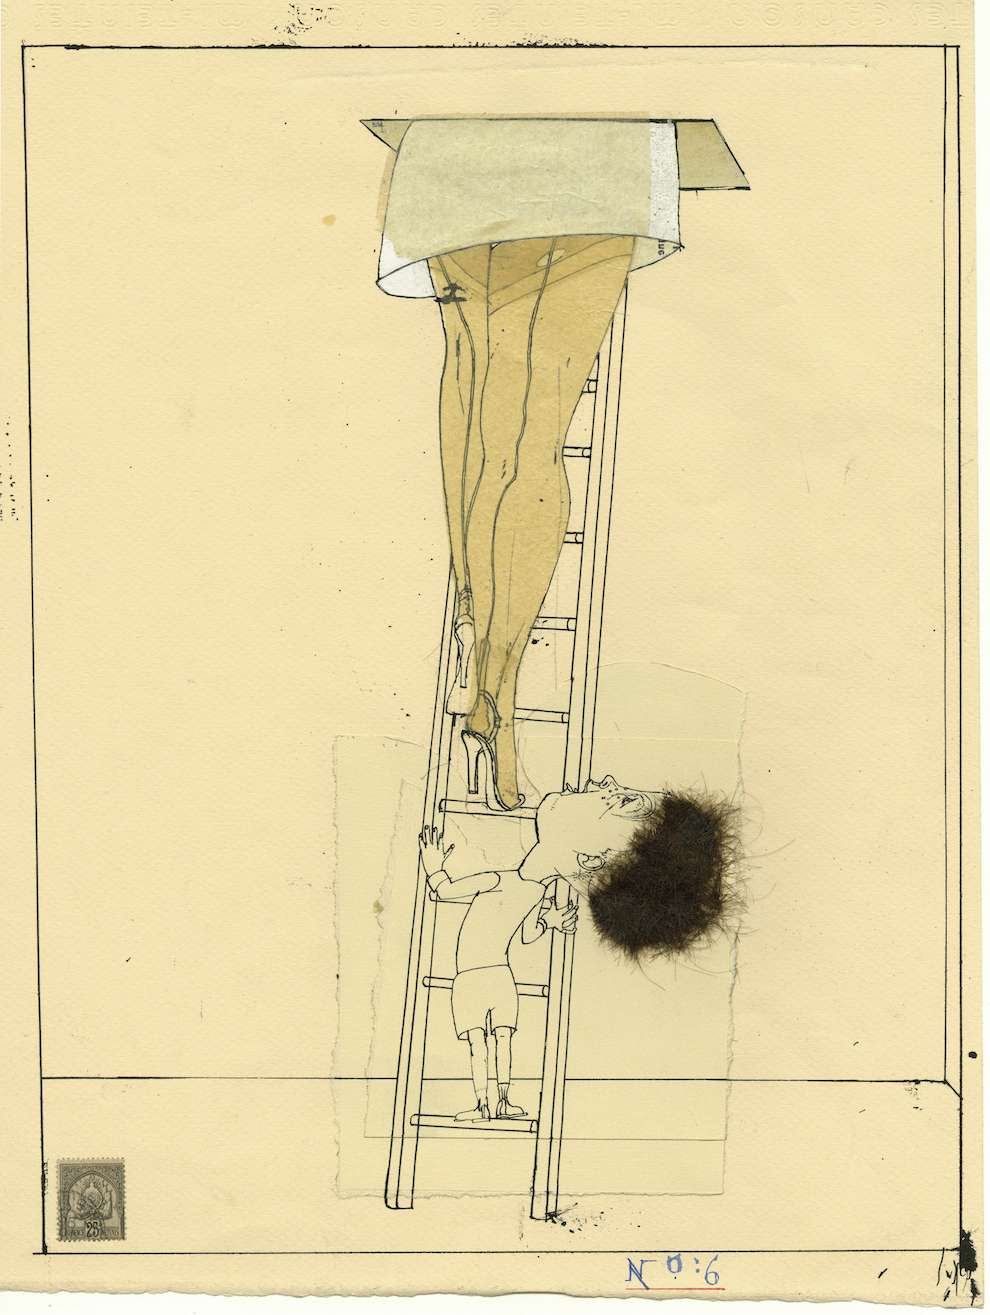 David Hughes, Line art illustration of a little kid looking under a woman's skirt while climbing a lader